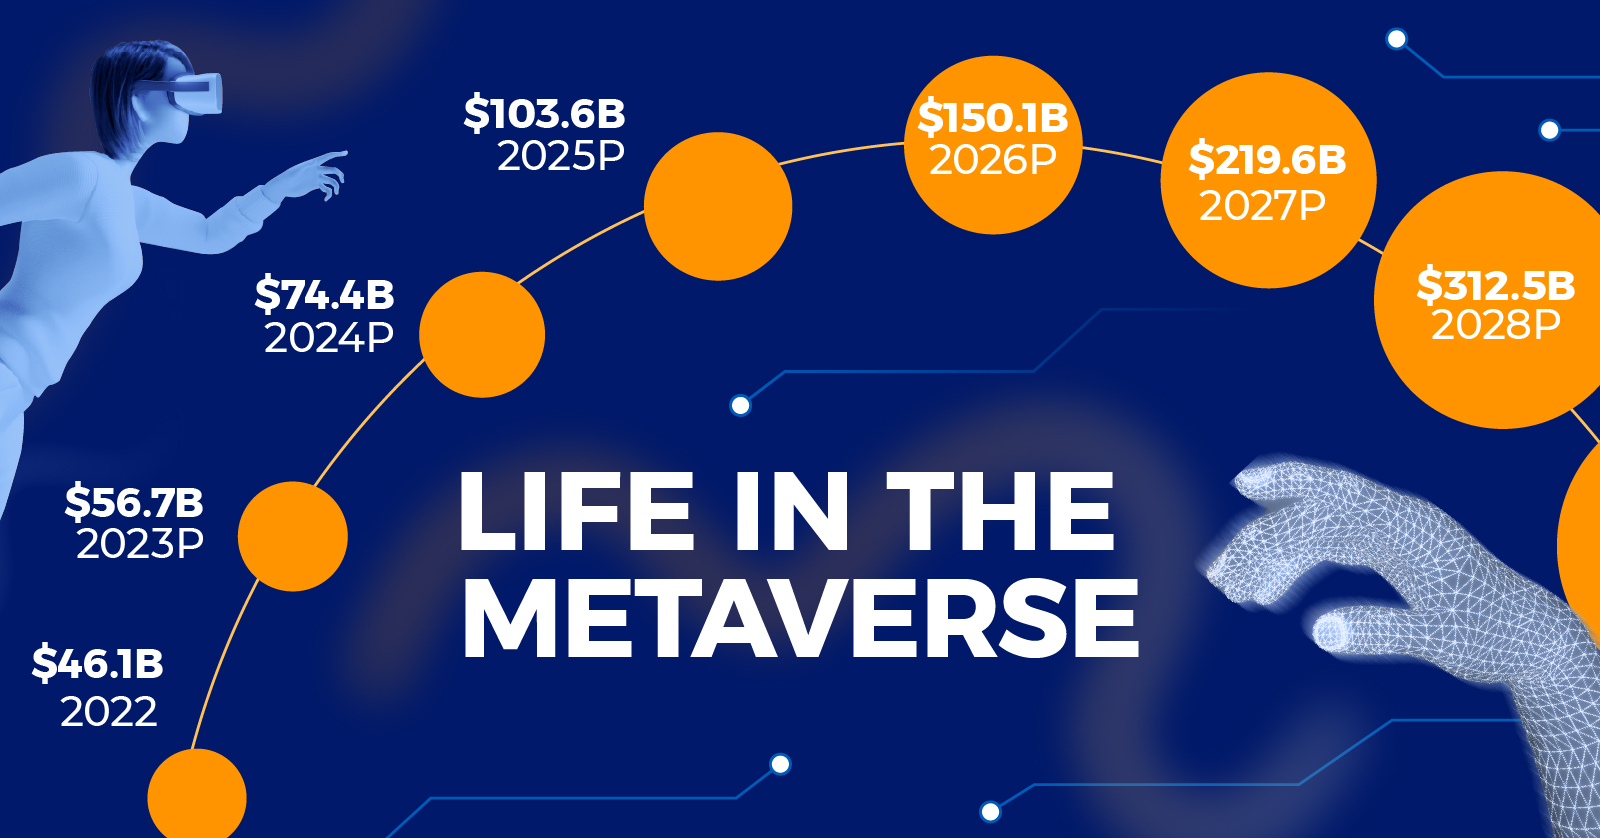 Teaser graphic of a bubble chart showing growth in market size of the metaverse industry.